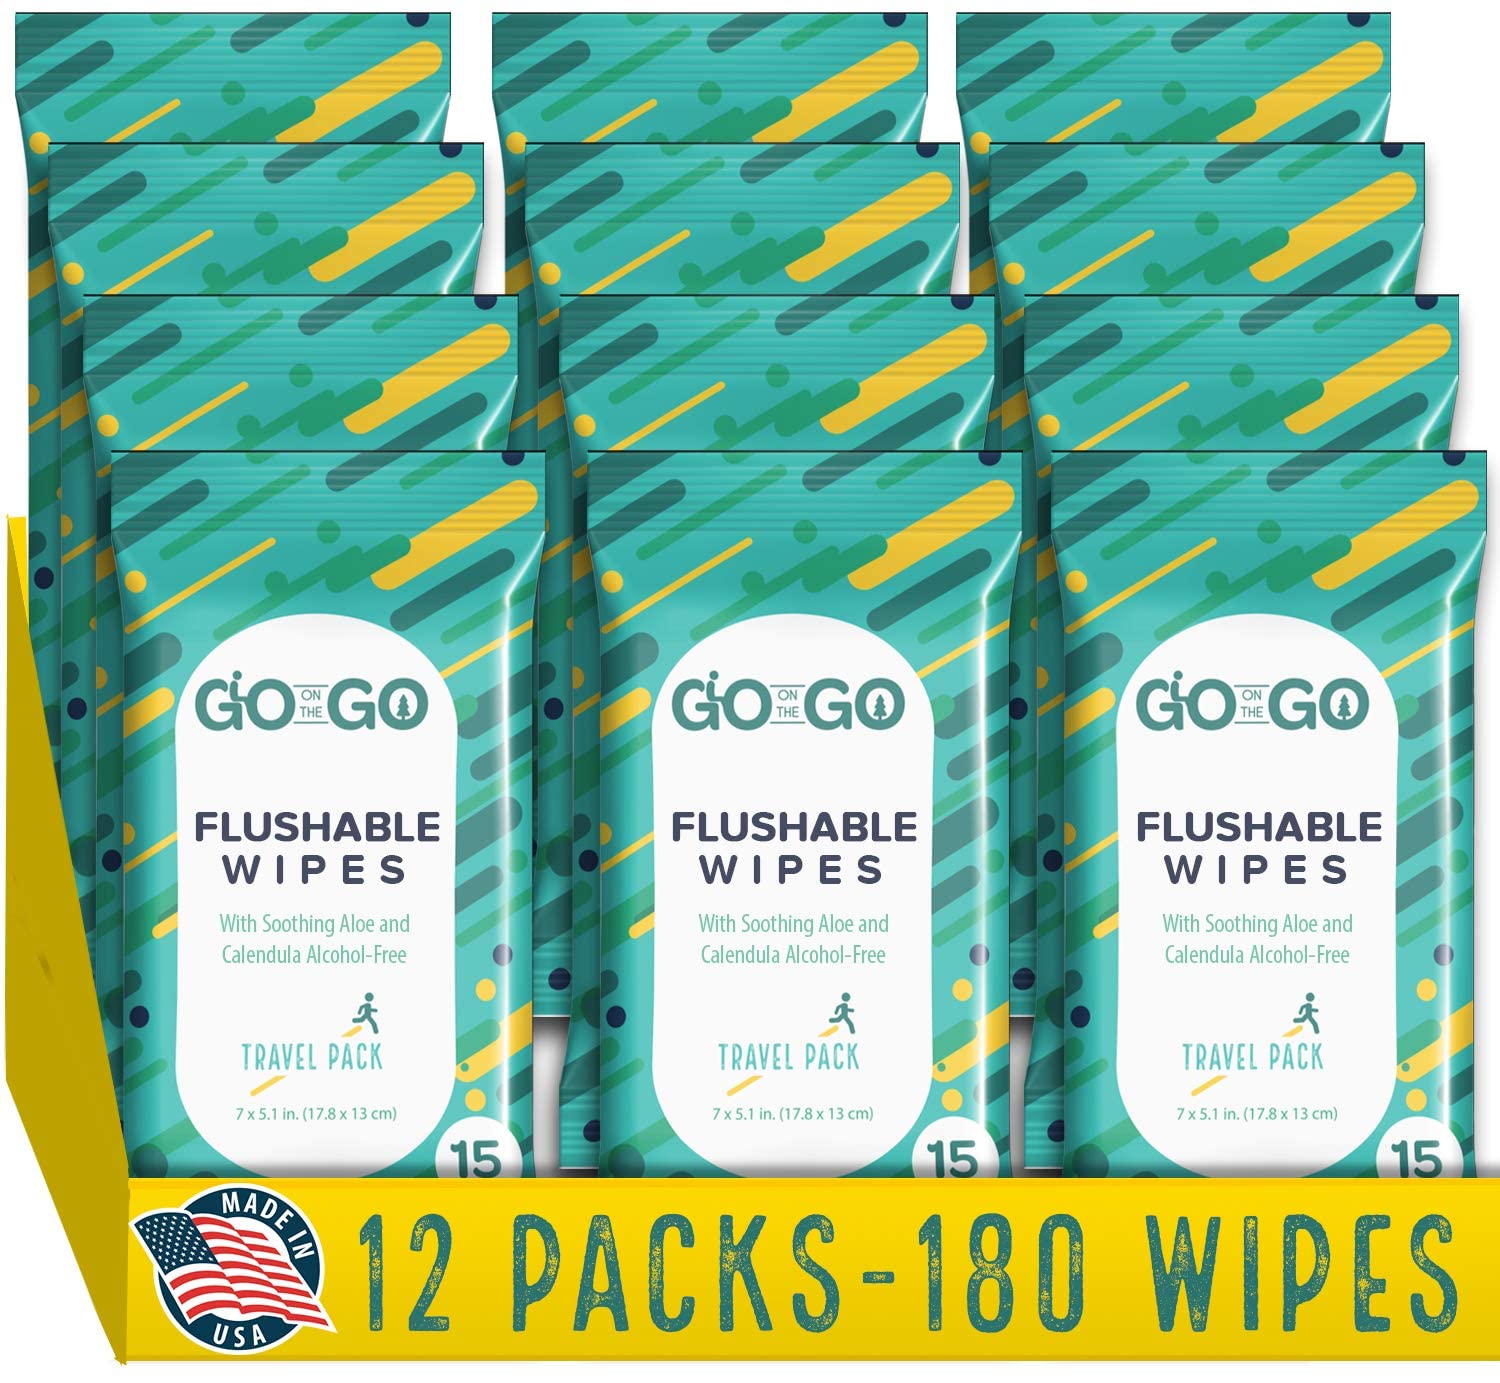 Book Cover Go on the Go Flushable Wet Wipes for Travel - Travel Flushable Wipes, Biodegradable, Alcohol-Free, with Soothing Aloe and Calendula - Made in the USA - 12 Packs of 15 Count Each (180 Wipes Total)